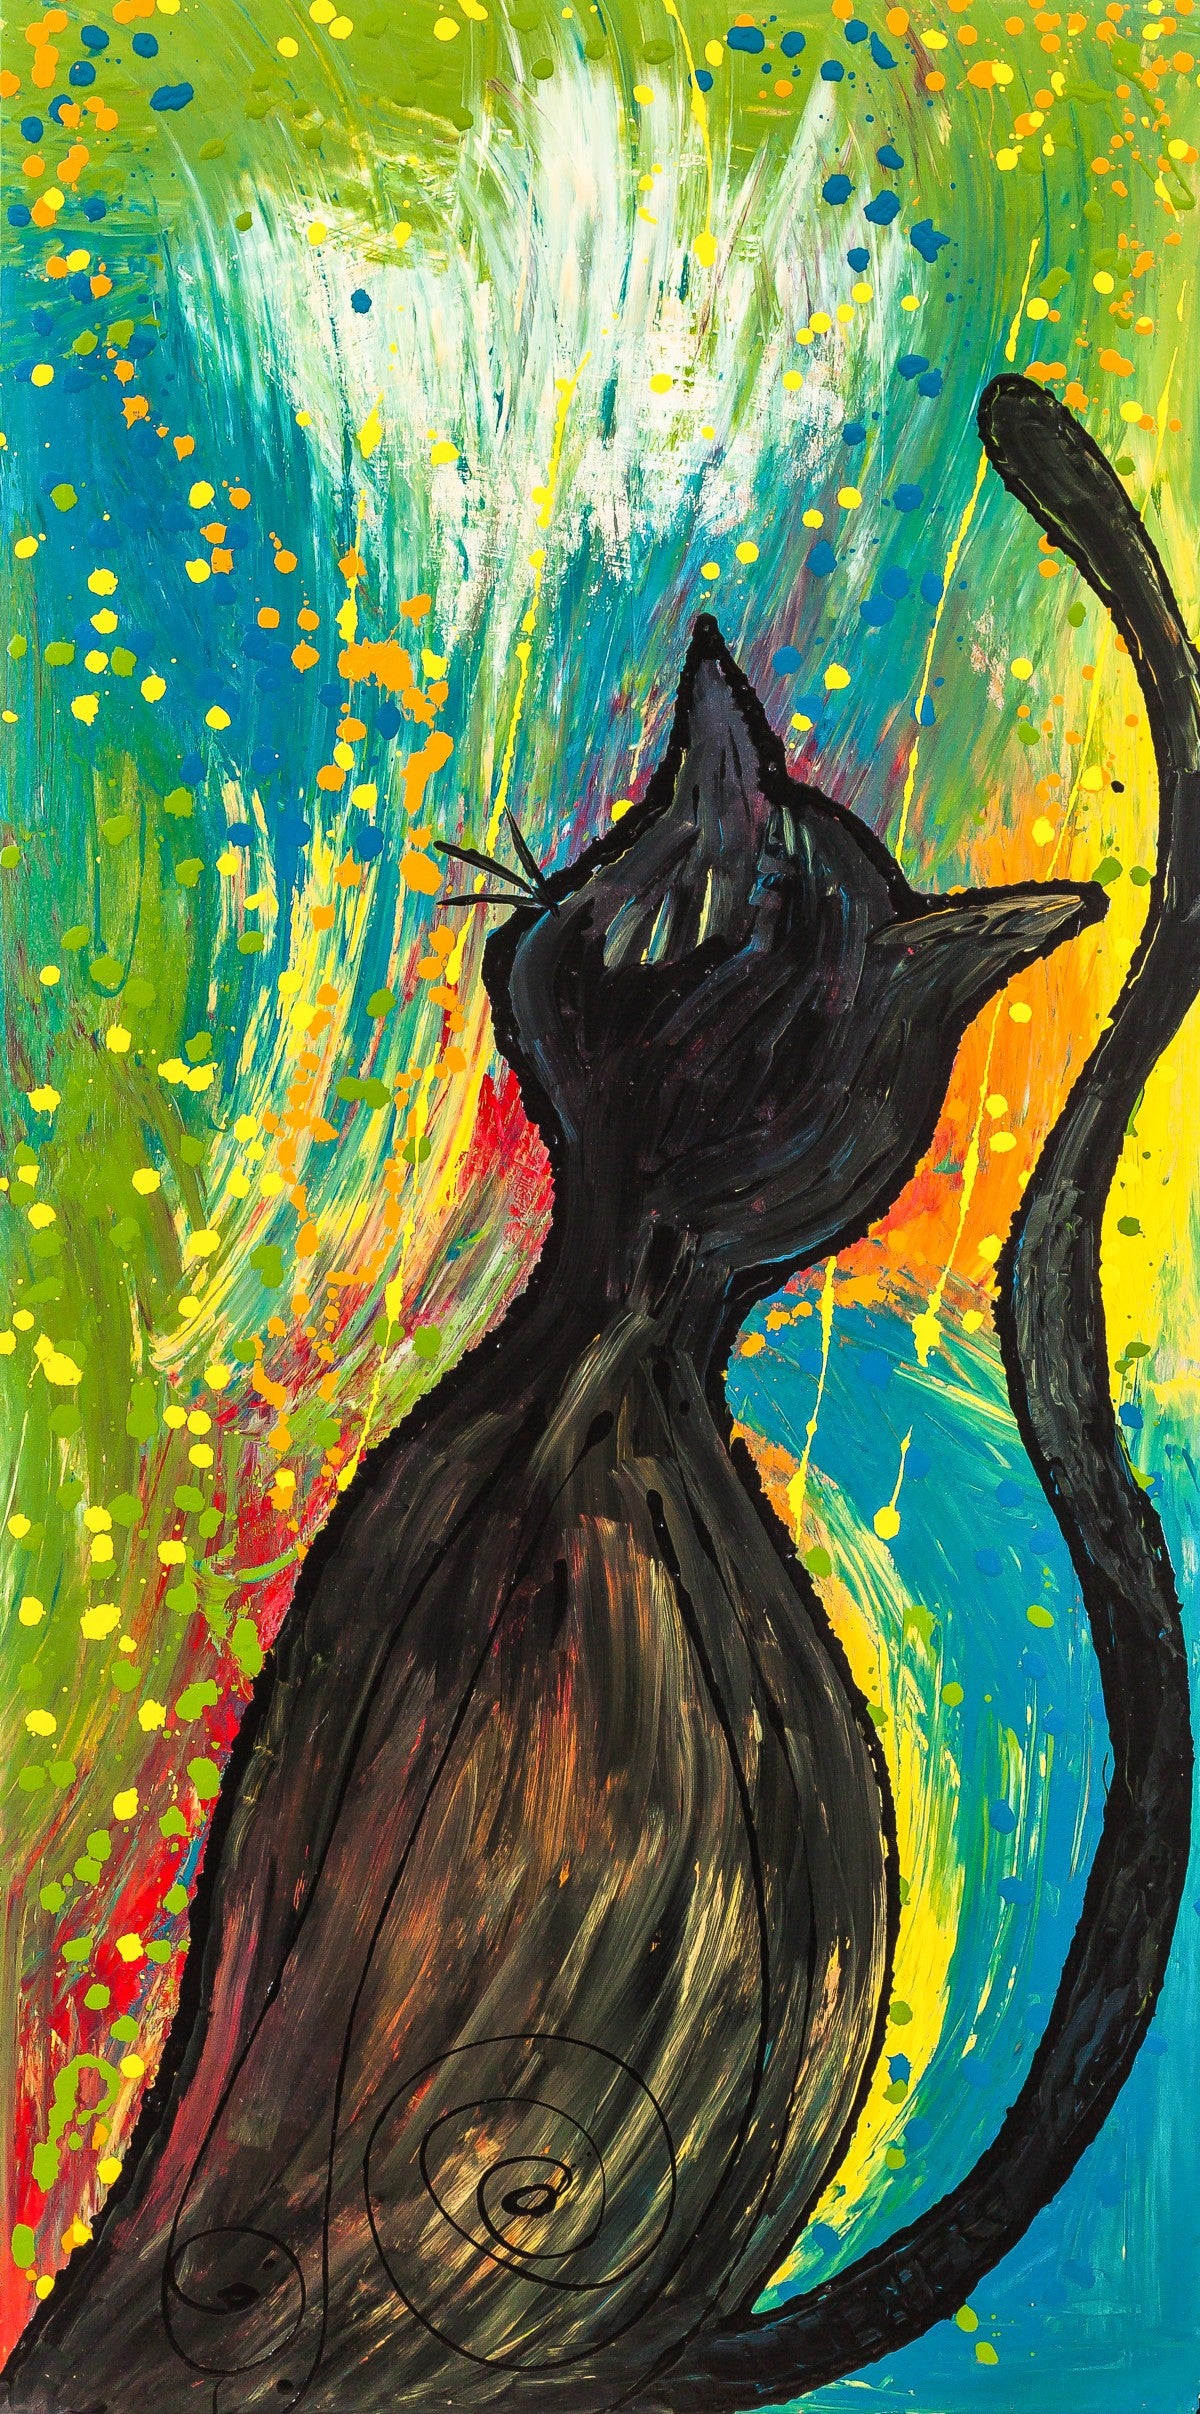 Marveling Cat - Abstract Cat Canvas Print or Acrylic Print